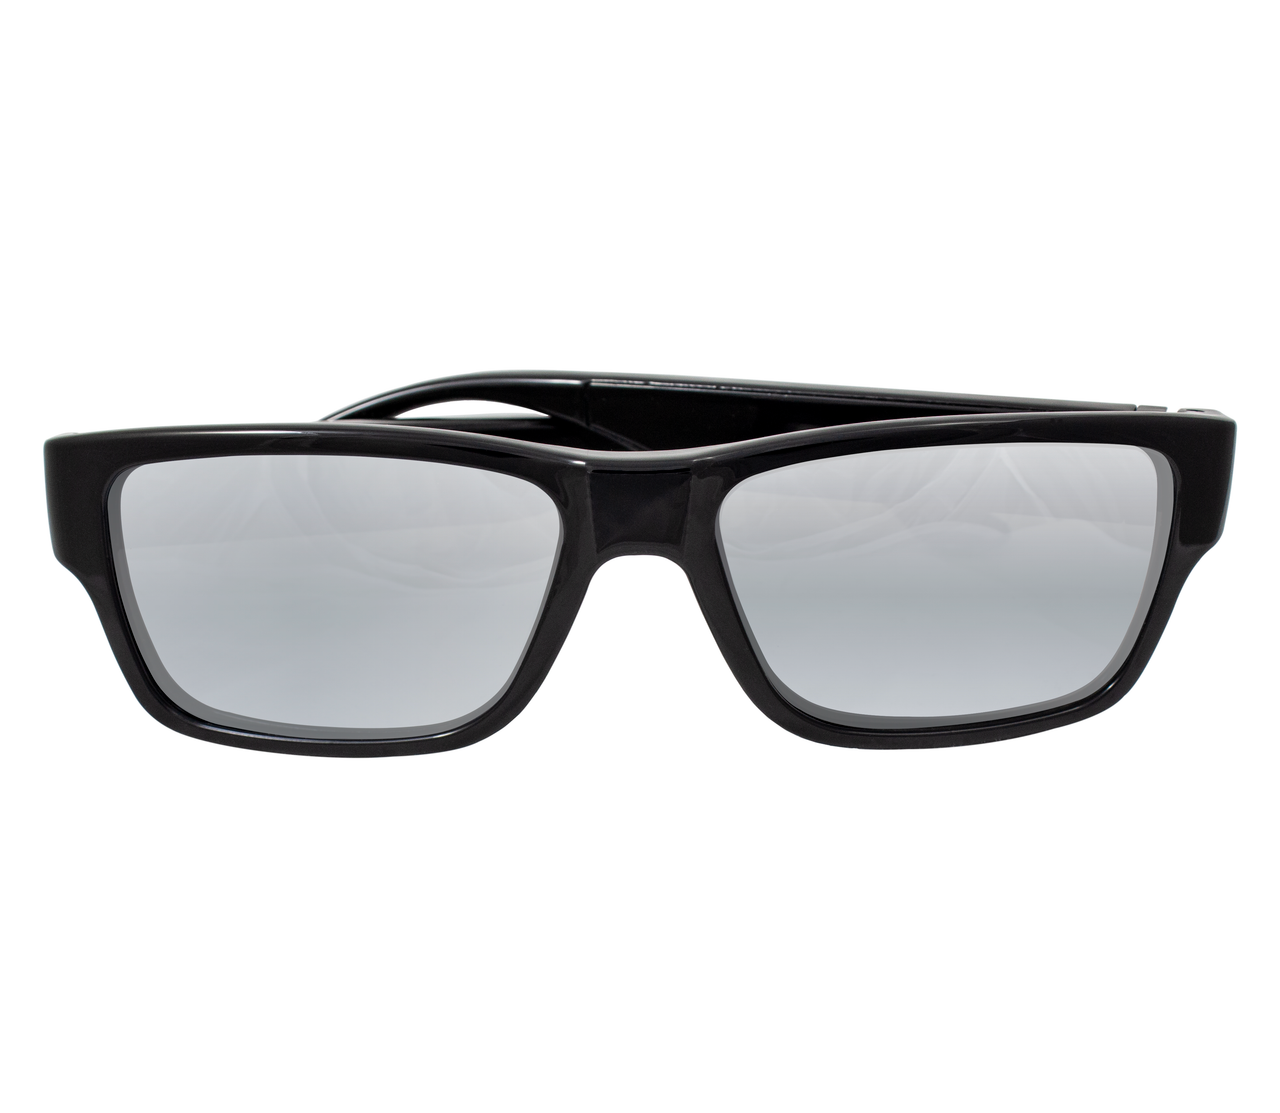 Sunglasses Hidden Camera With Built in DVR 1920X1080